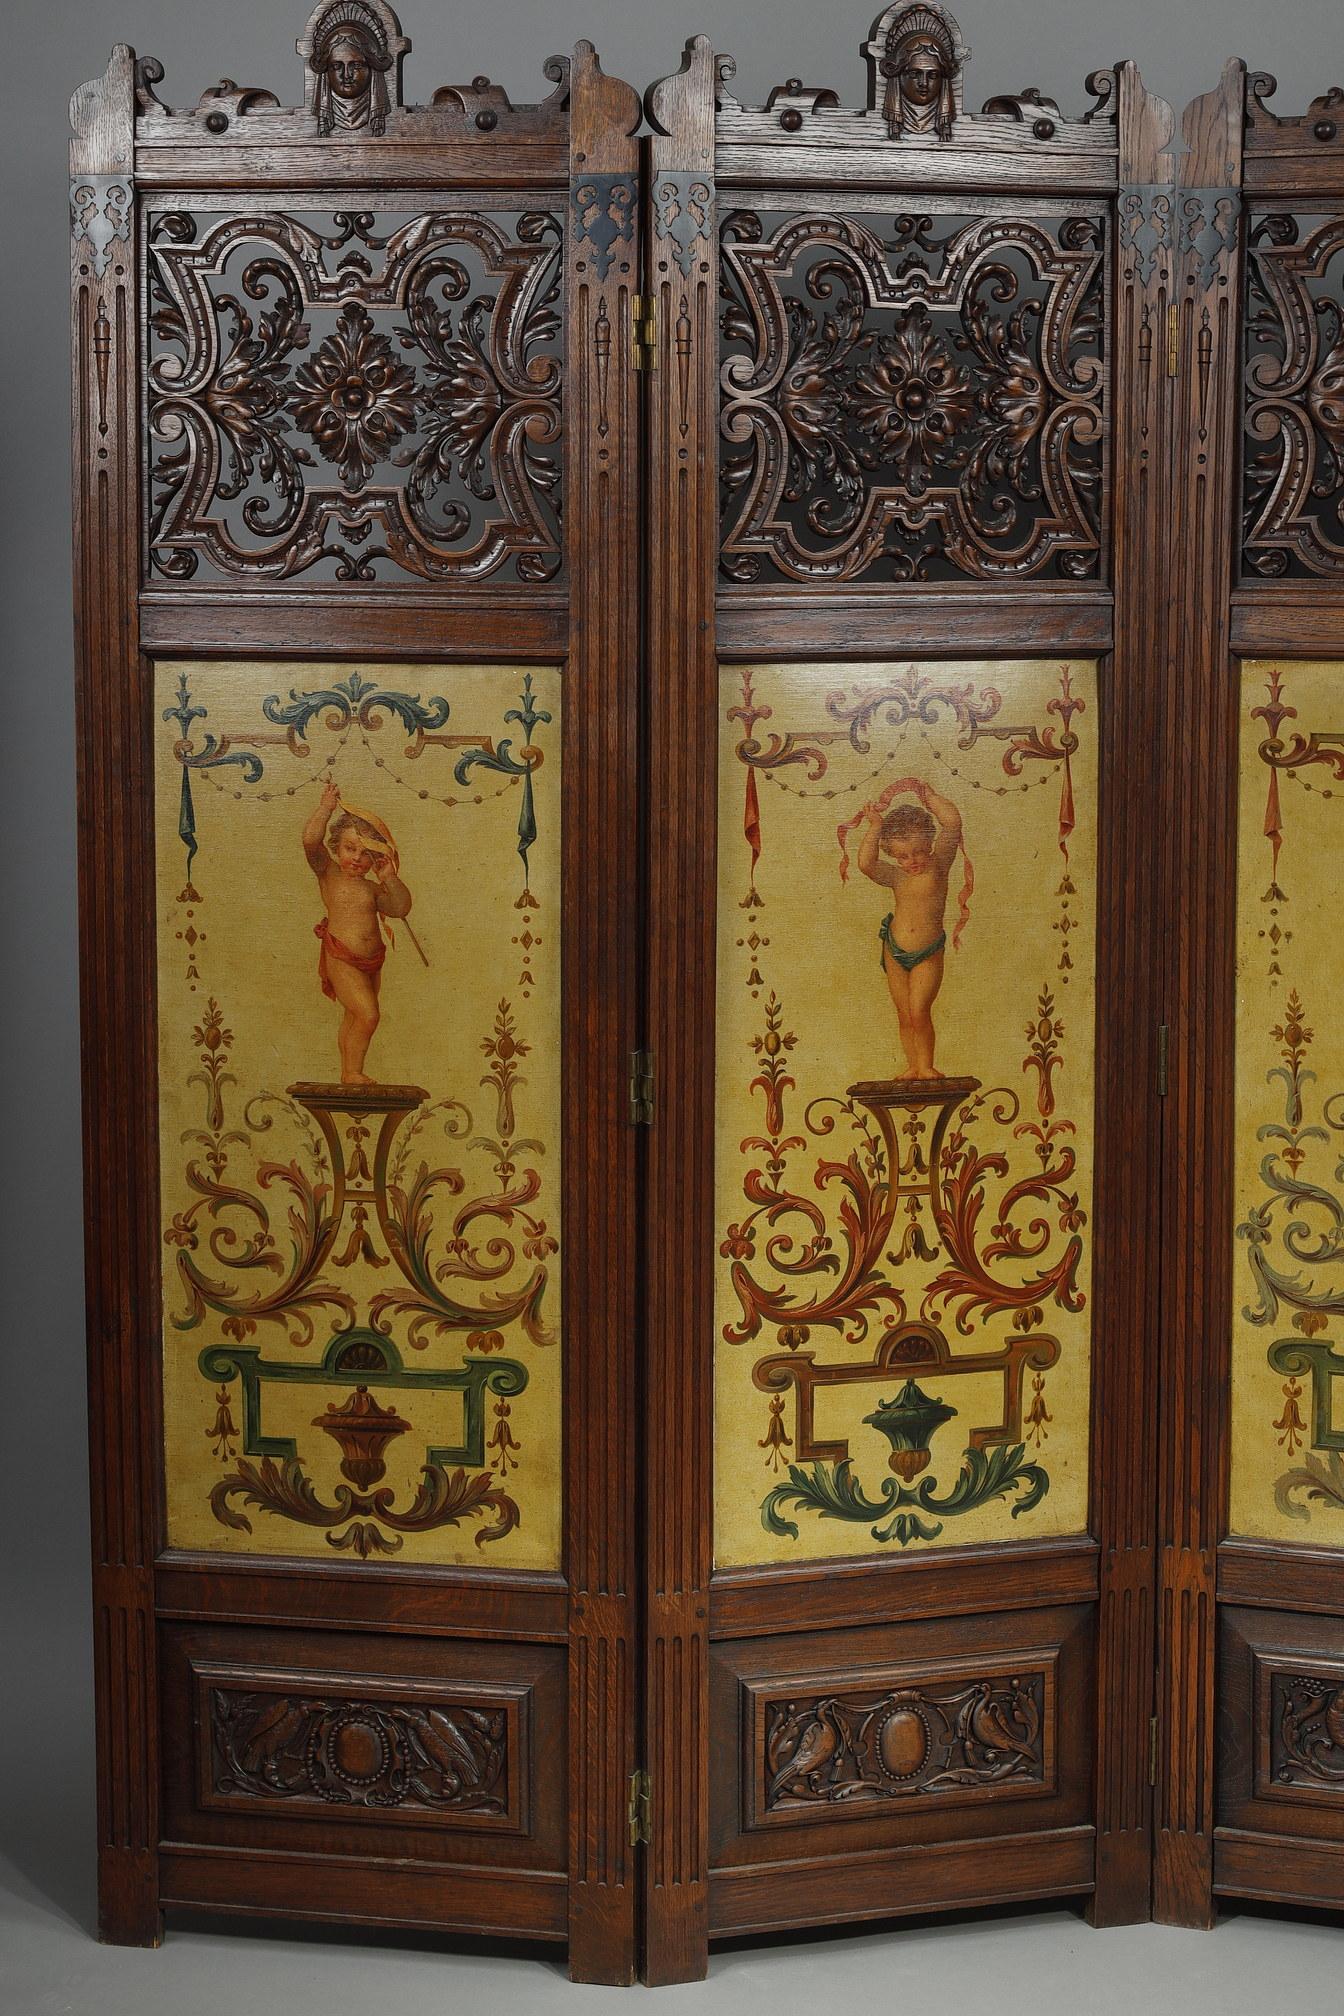 Four-leaf partition screen in carved wood and painted in the Bérain style. Each panel bears on the top a woman's head wearing a veil and surrounded by a shell motif. The upper part in openwork wood is finely carved and engraved with arabesque and